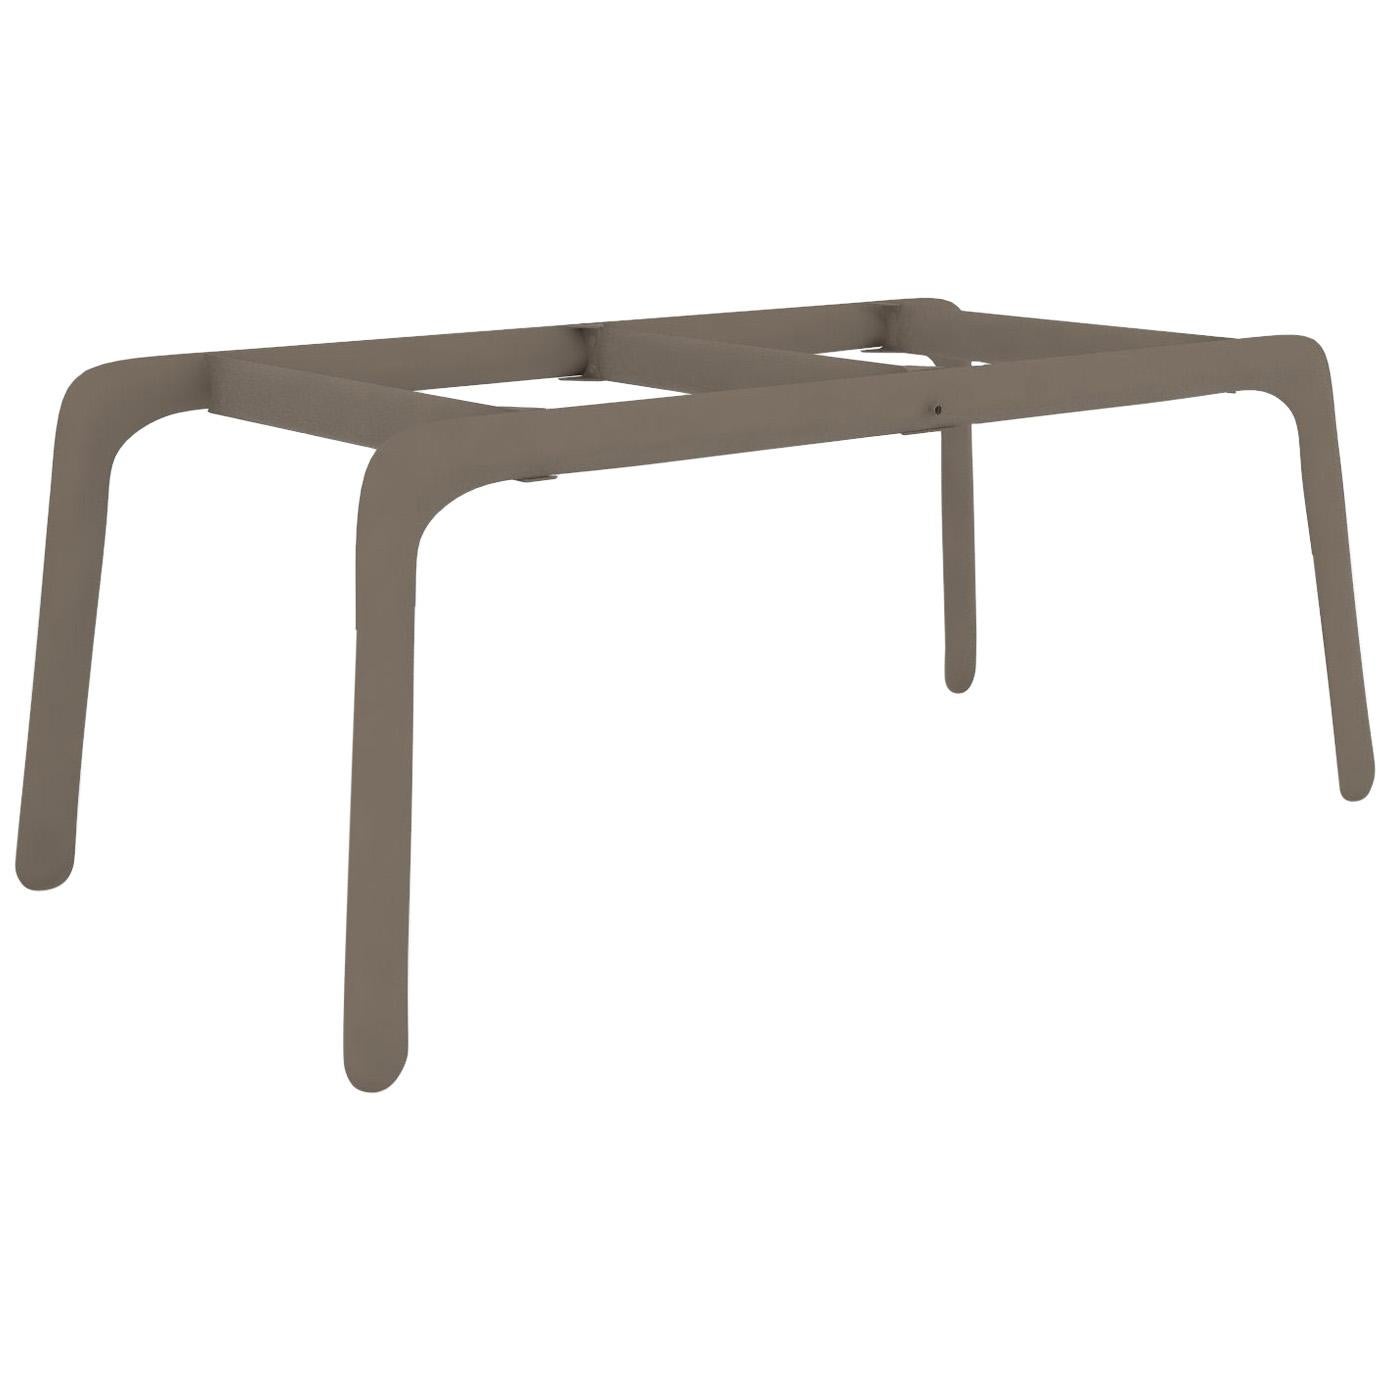 Most Polished Beige Grey Color Carbon Steel Writing Table by Zieta For Sale